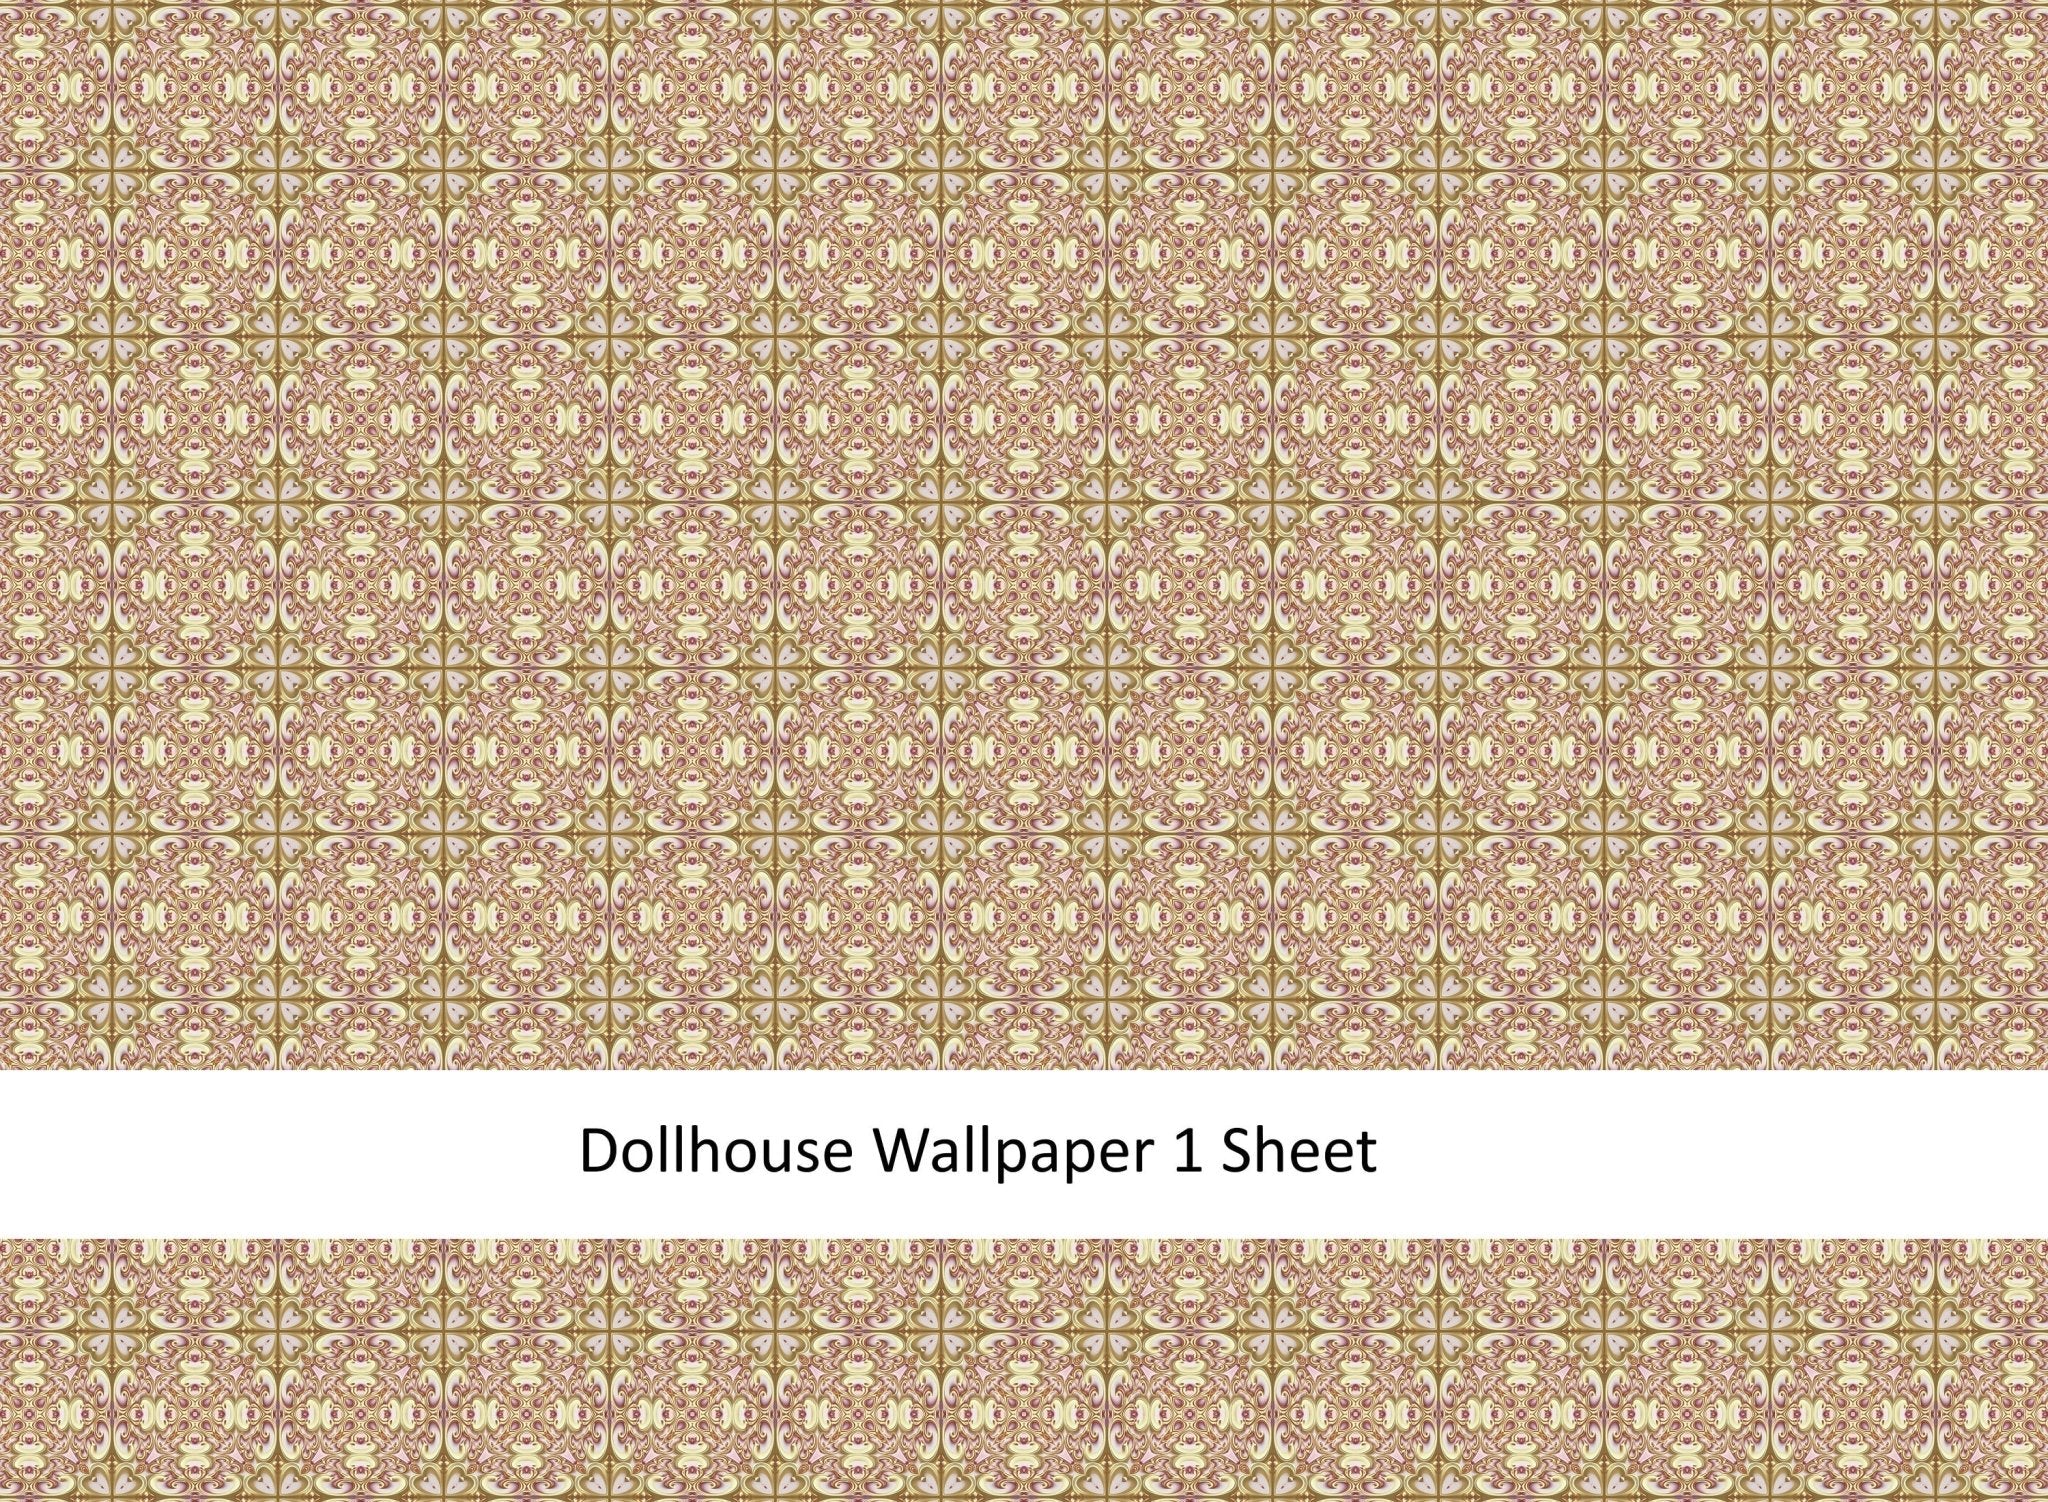 Dollhouse Wallpaper 15 images